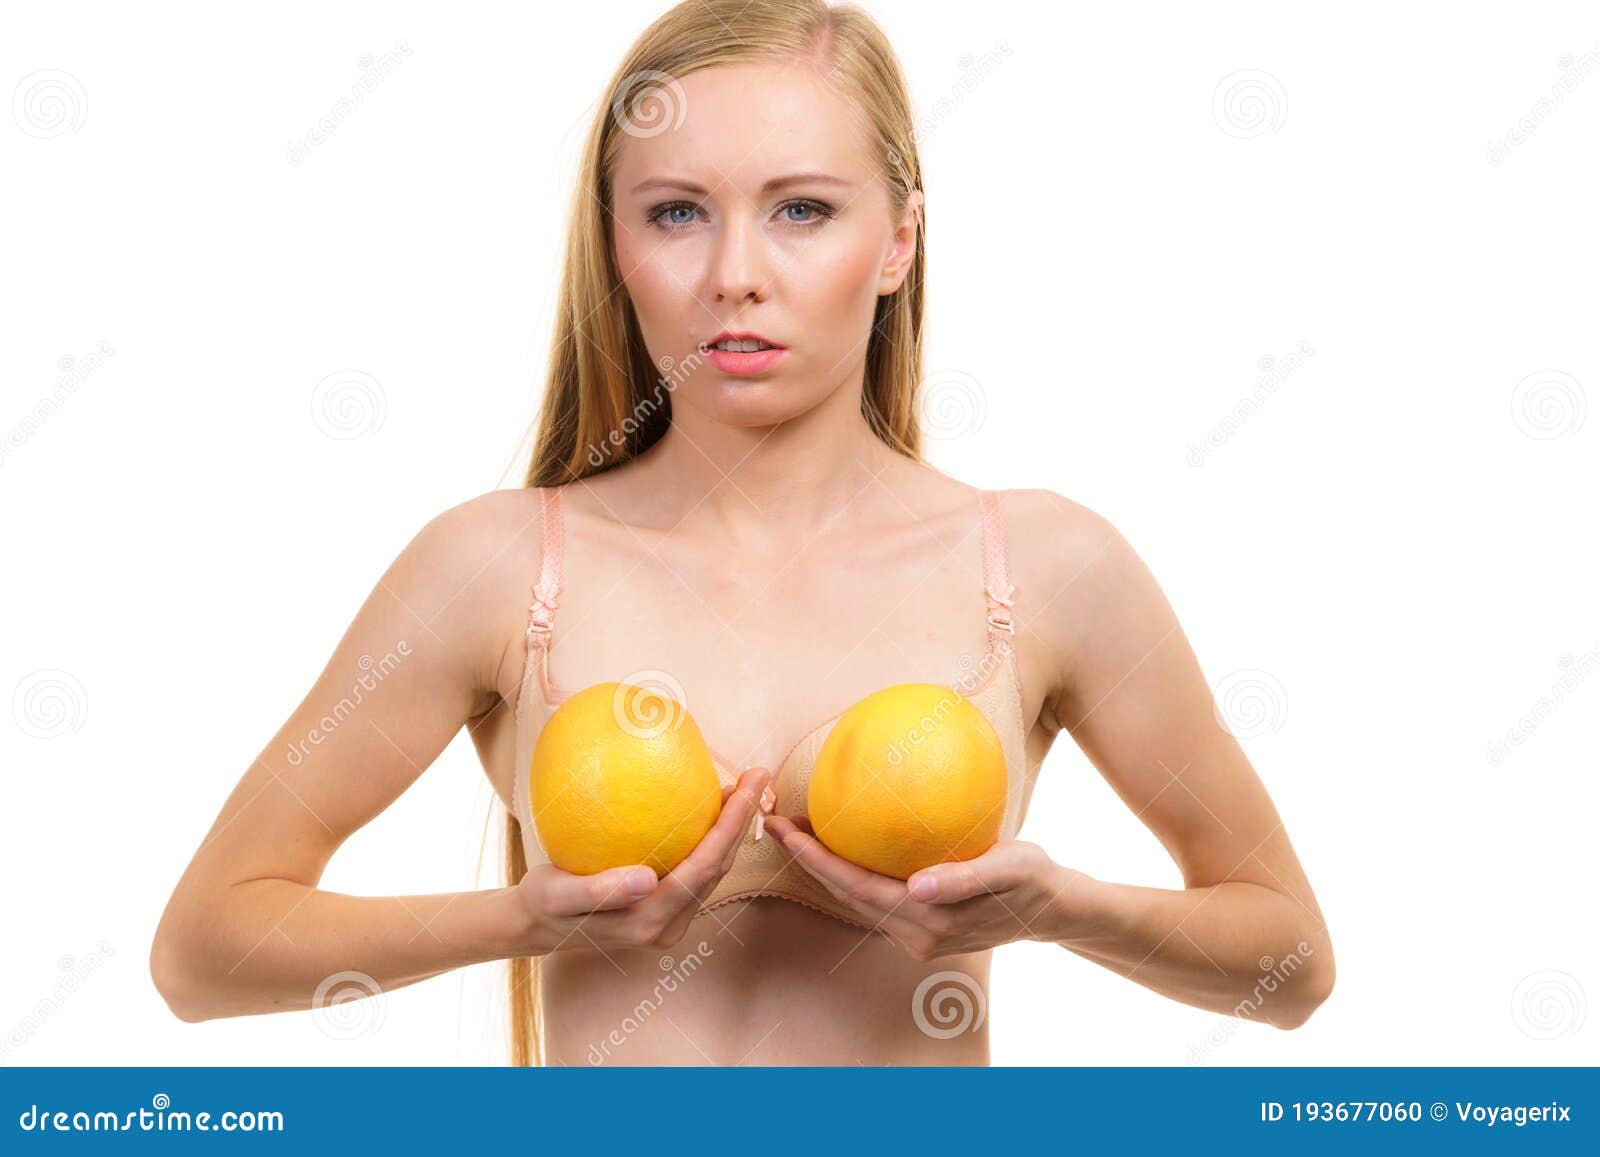 https://thumbs.dreamstime.com/z/woman-small-boobs-holds-big-orange-fruits-slim-young-woman-small-boobs-wearing-bra-holding-big-orange-fruits-breast-enlargement-193677060.jpg